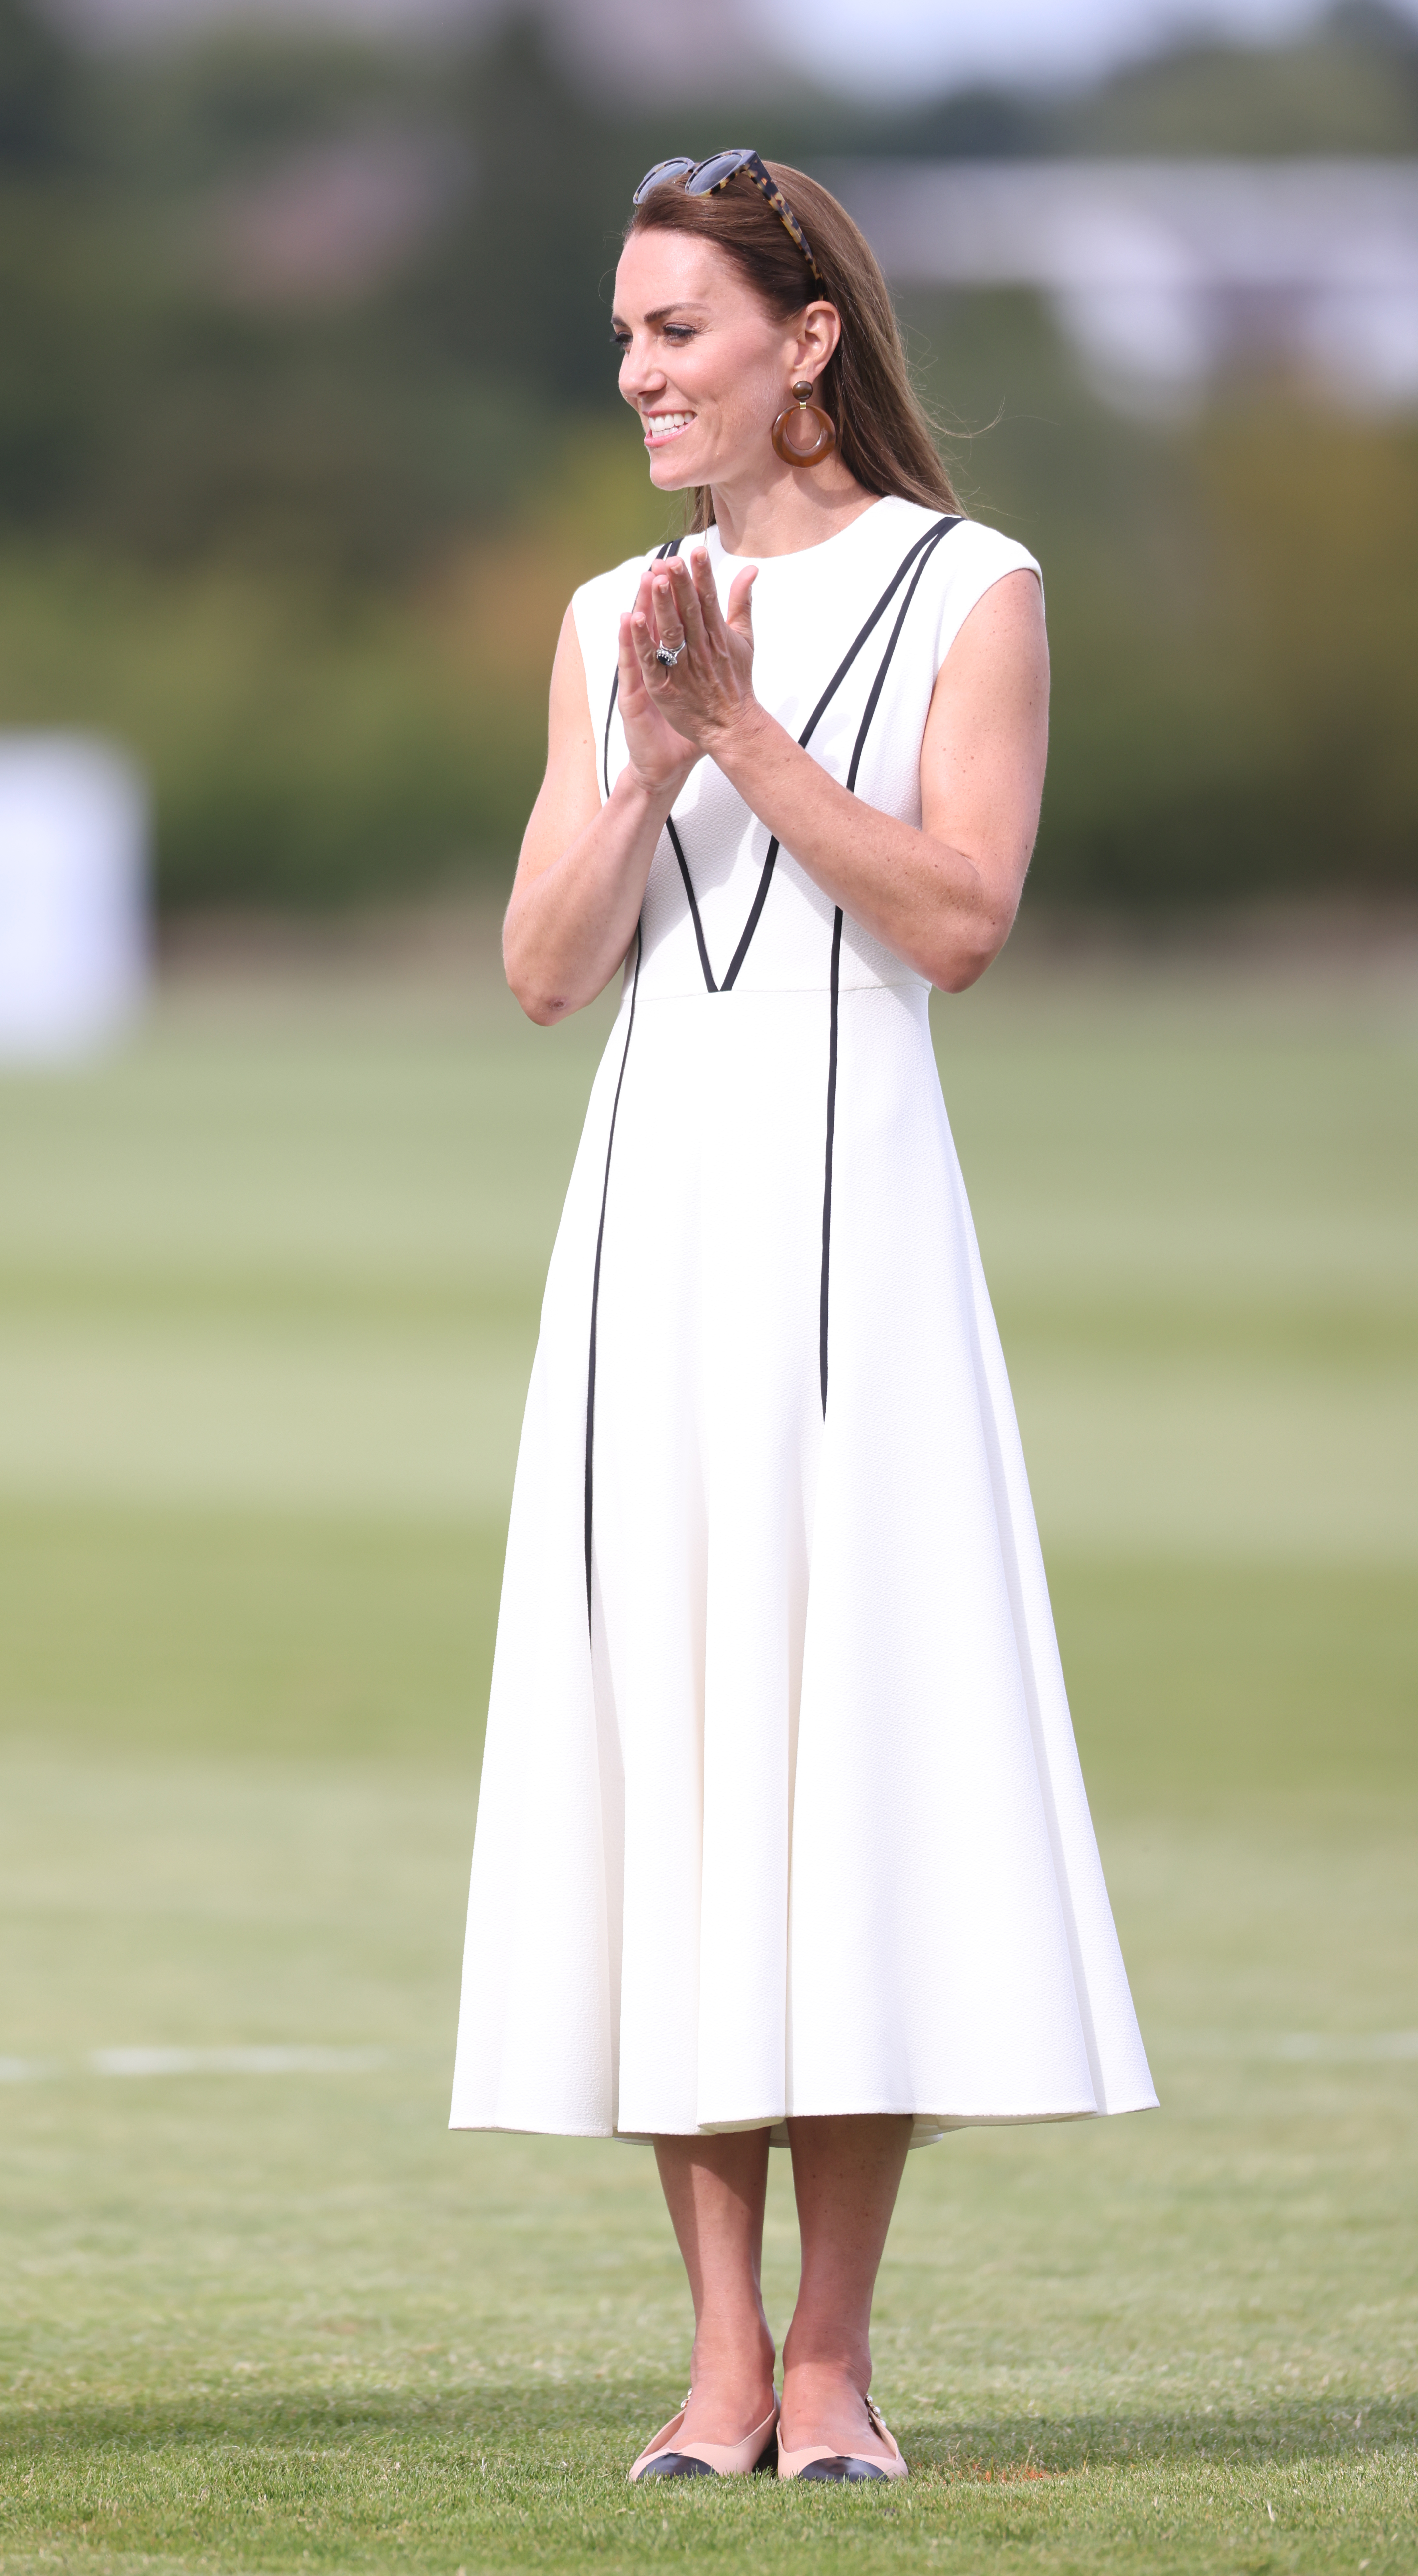 The Duchess of Cambridge at the Out-Sourcing Inc charity polo match at Guards Polo Club, Smiths Lawn, Windsor